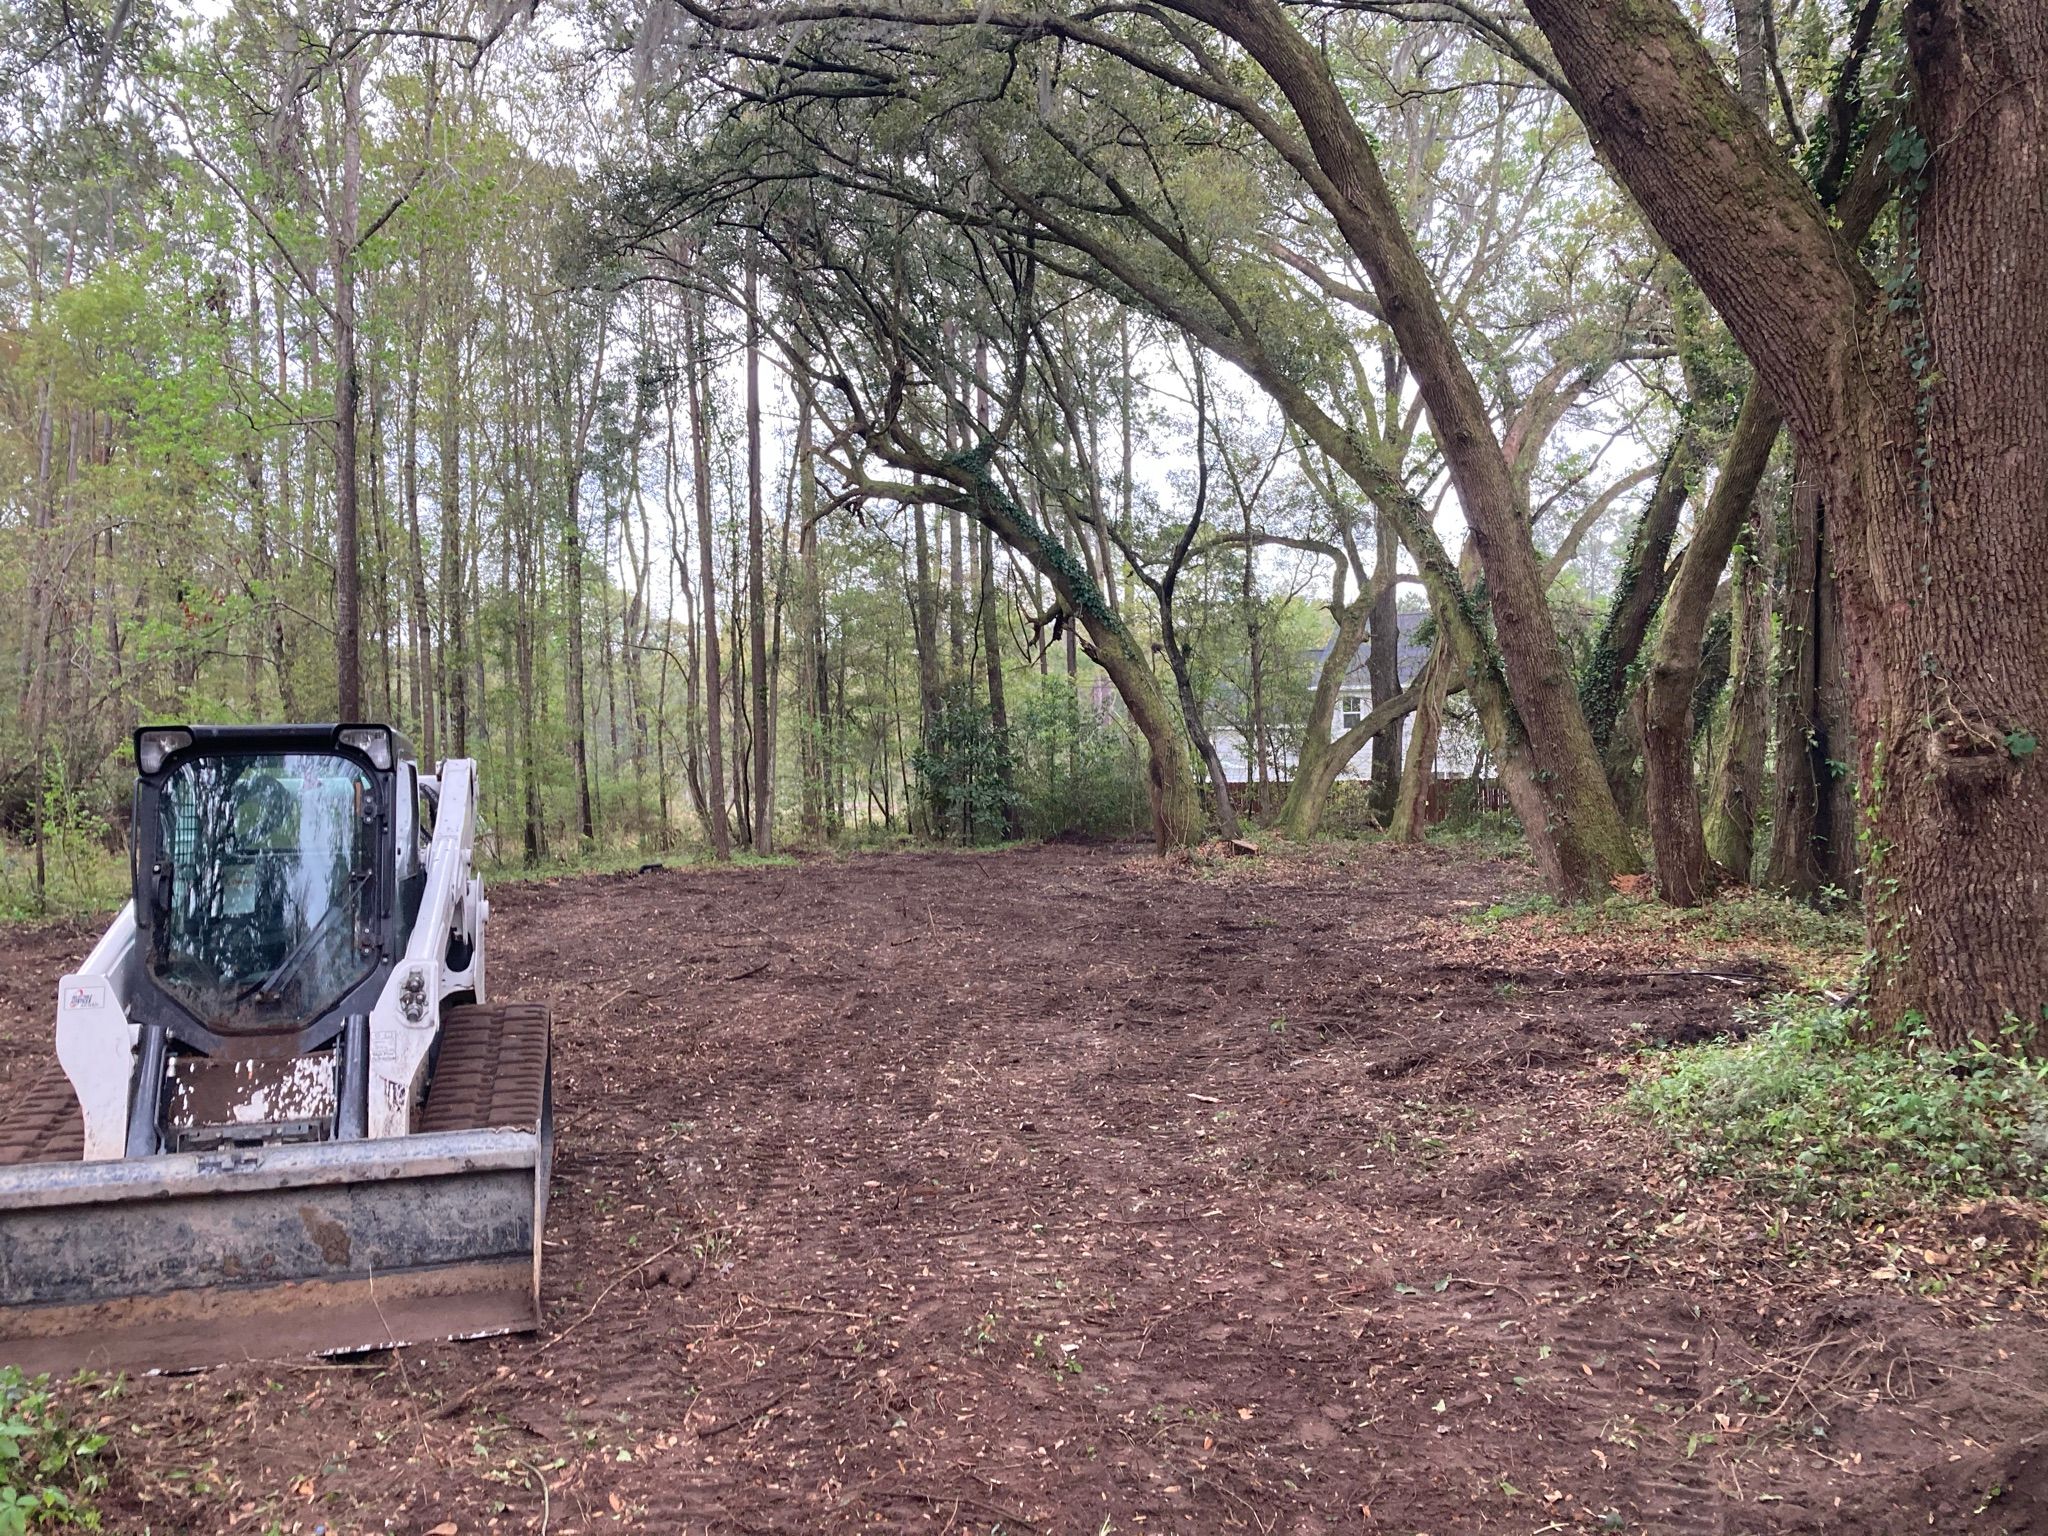 Land clearing for CW Earthworks, LLC in Charleston, South Carolina